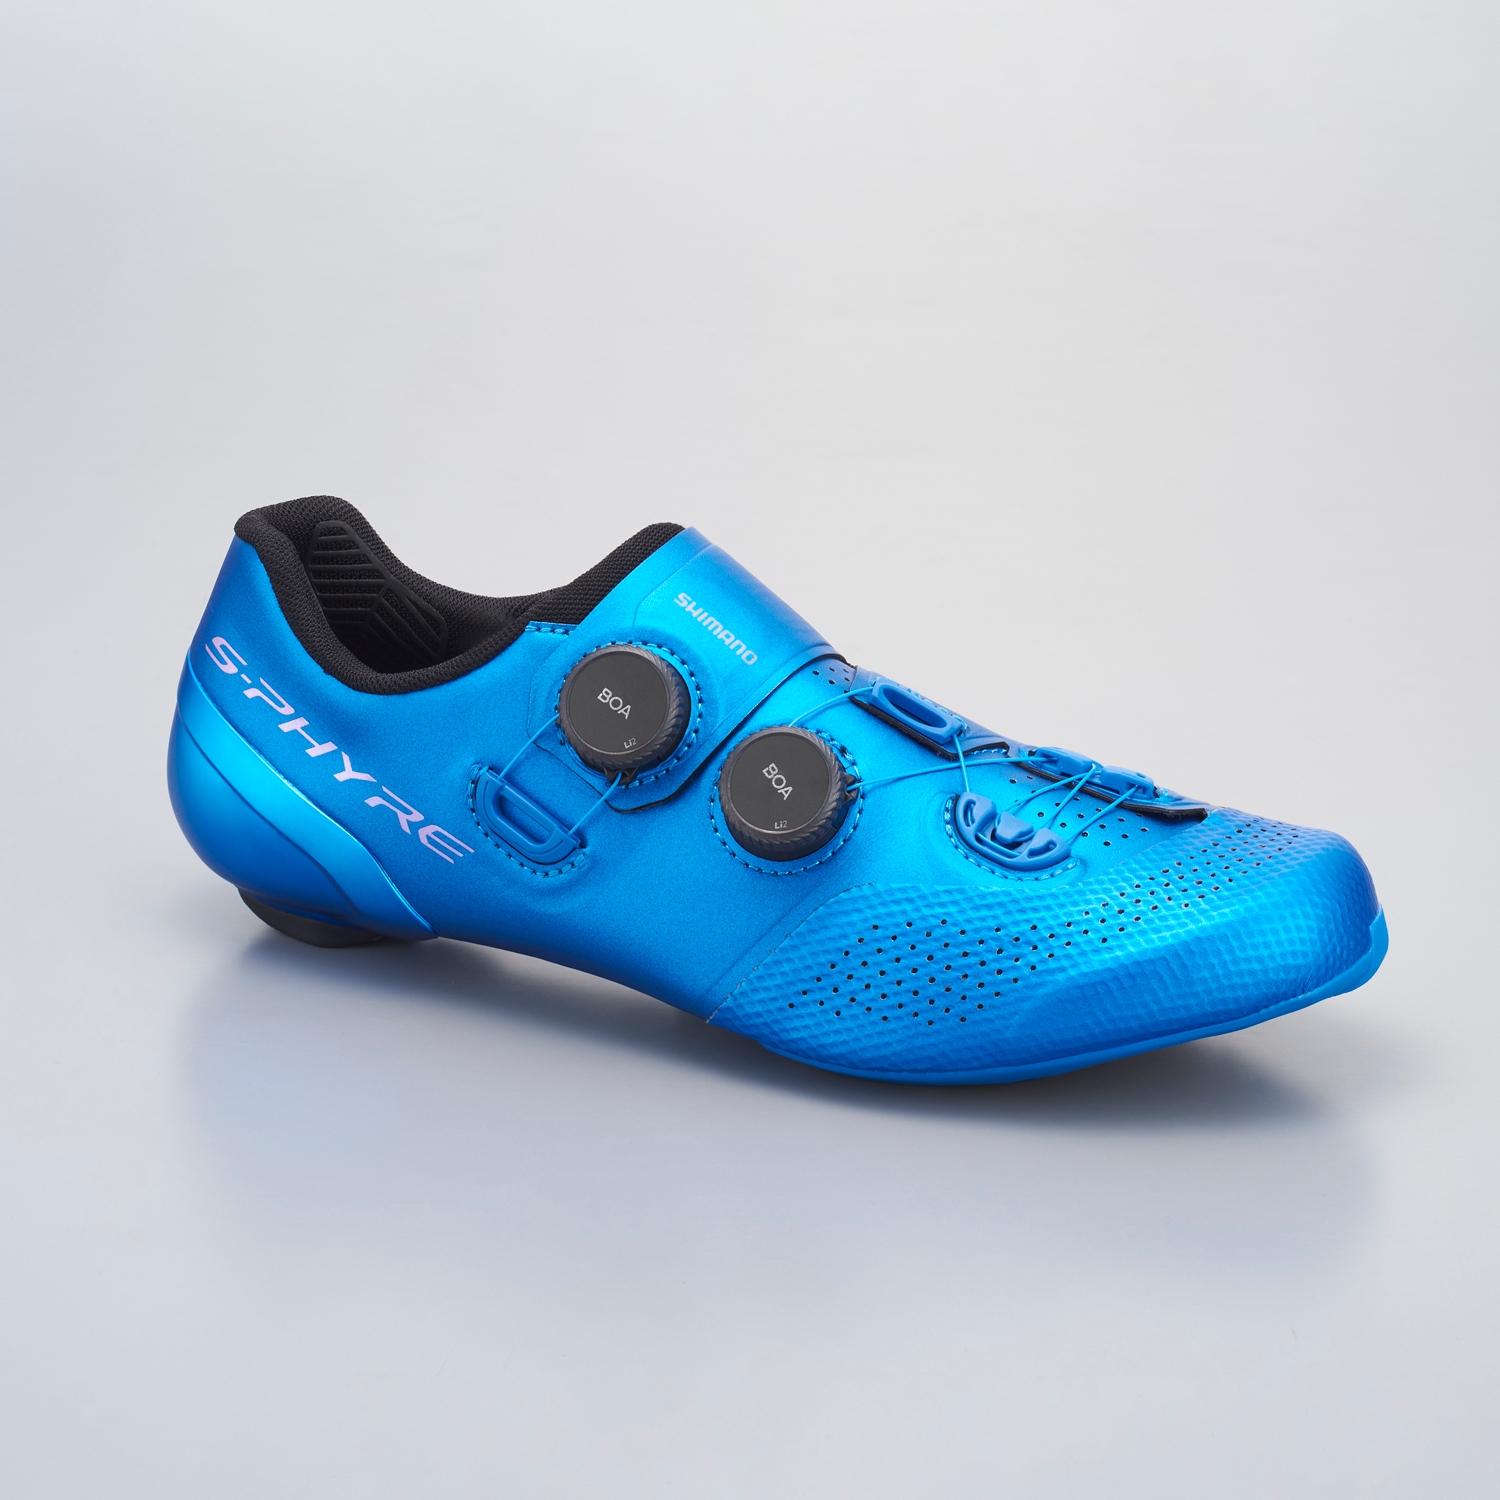 spanning loterij kraai New Shimano S-Phyre RC902 shoes hit the road - Canadian Cycling Magazine